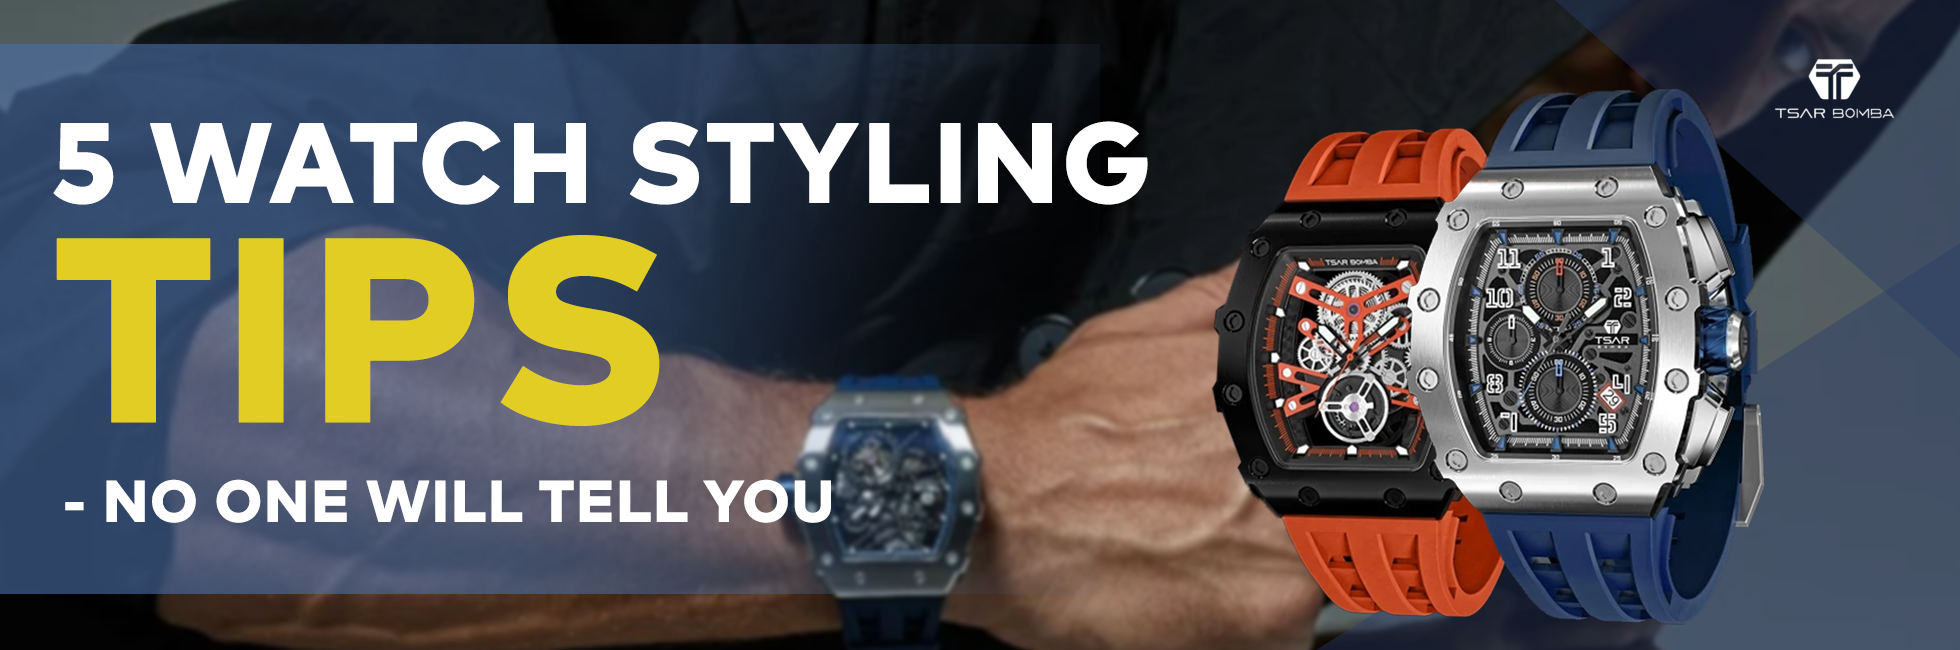 5 Watch Styling Tips - No One Will Tell You